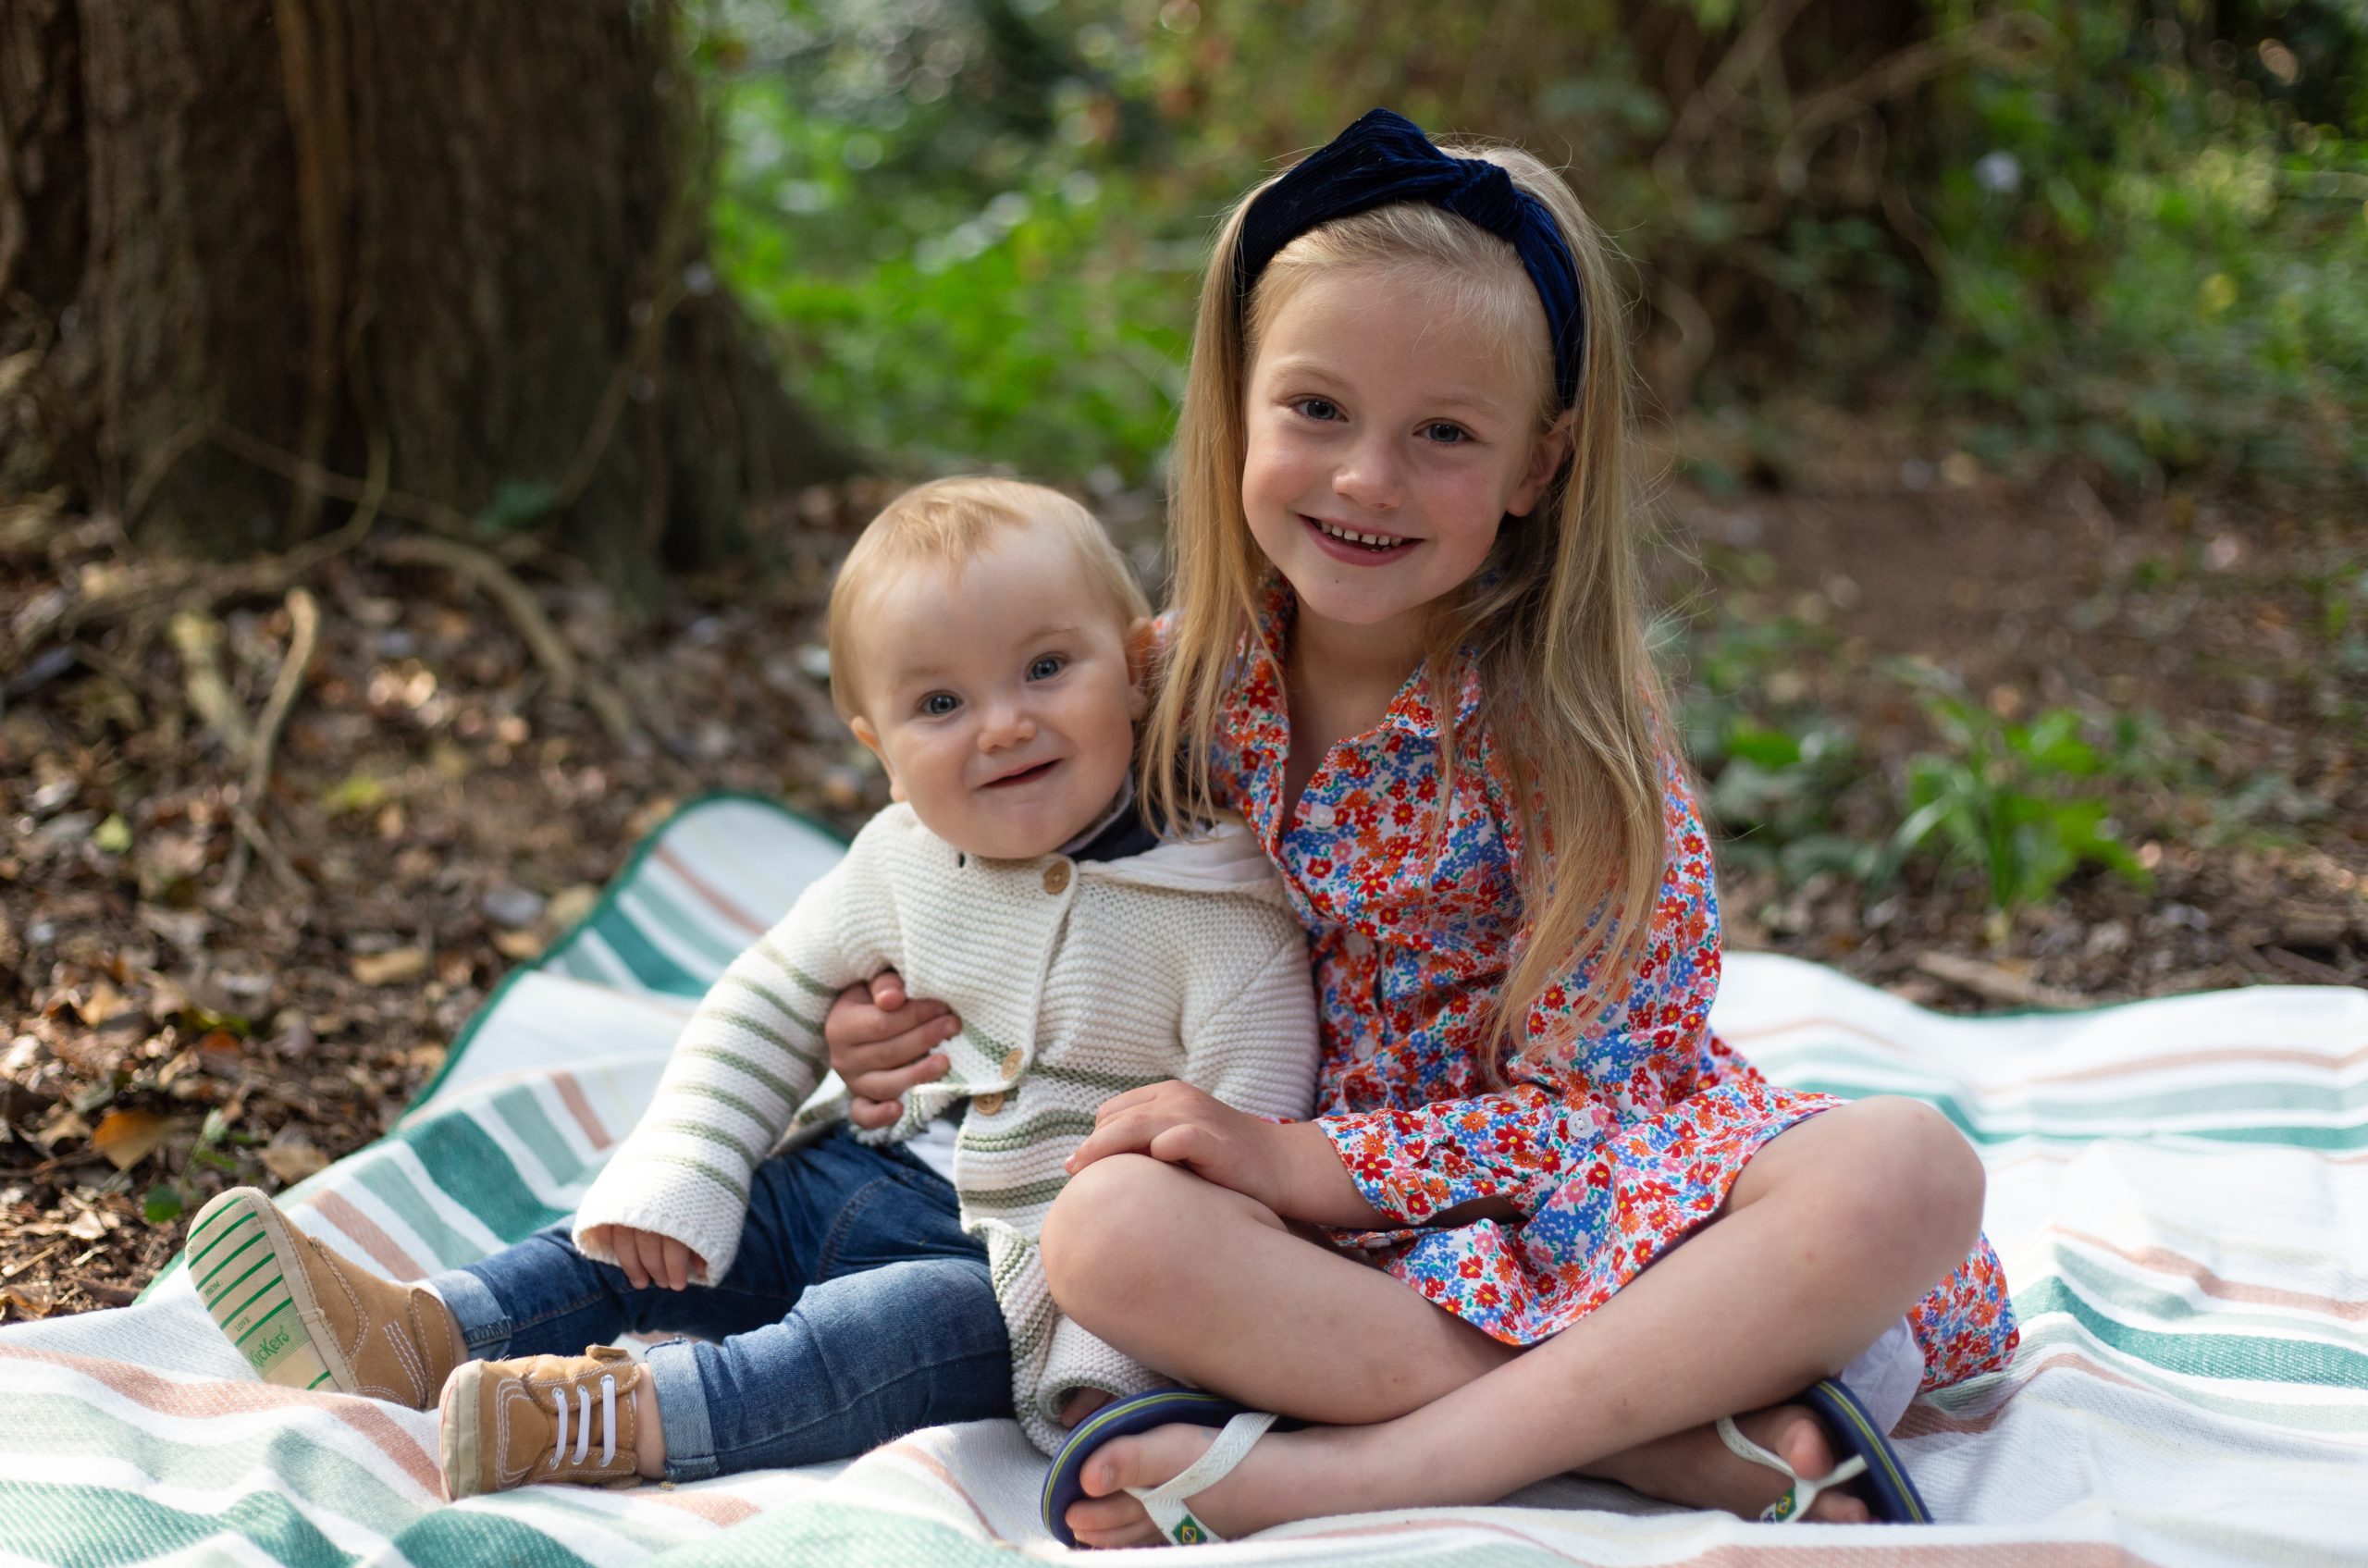 photographer in Colchester - happy smiling children on a picnic blanket in the woods